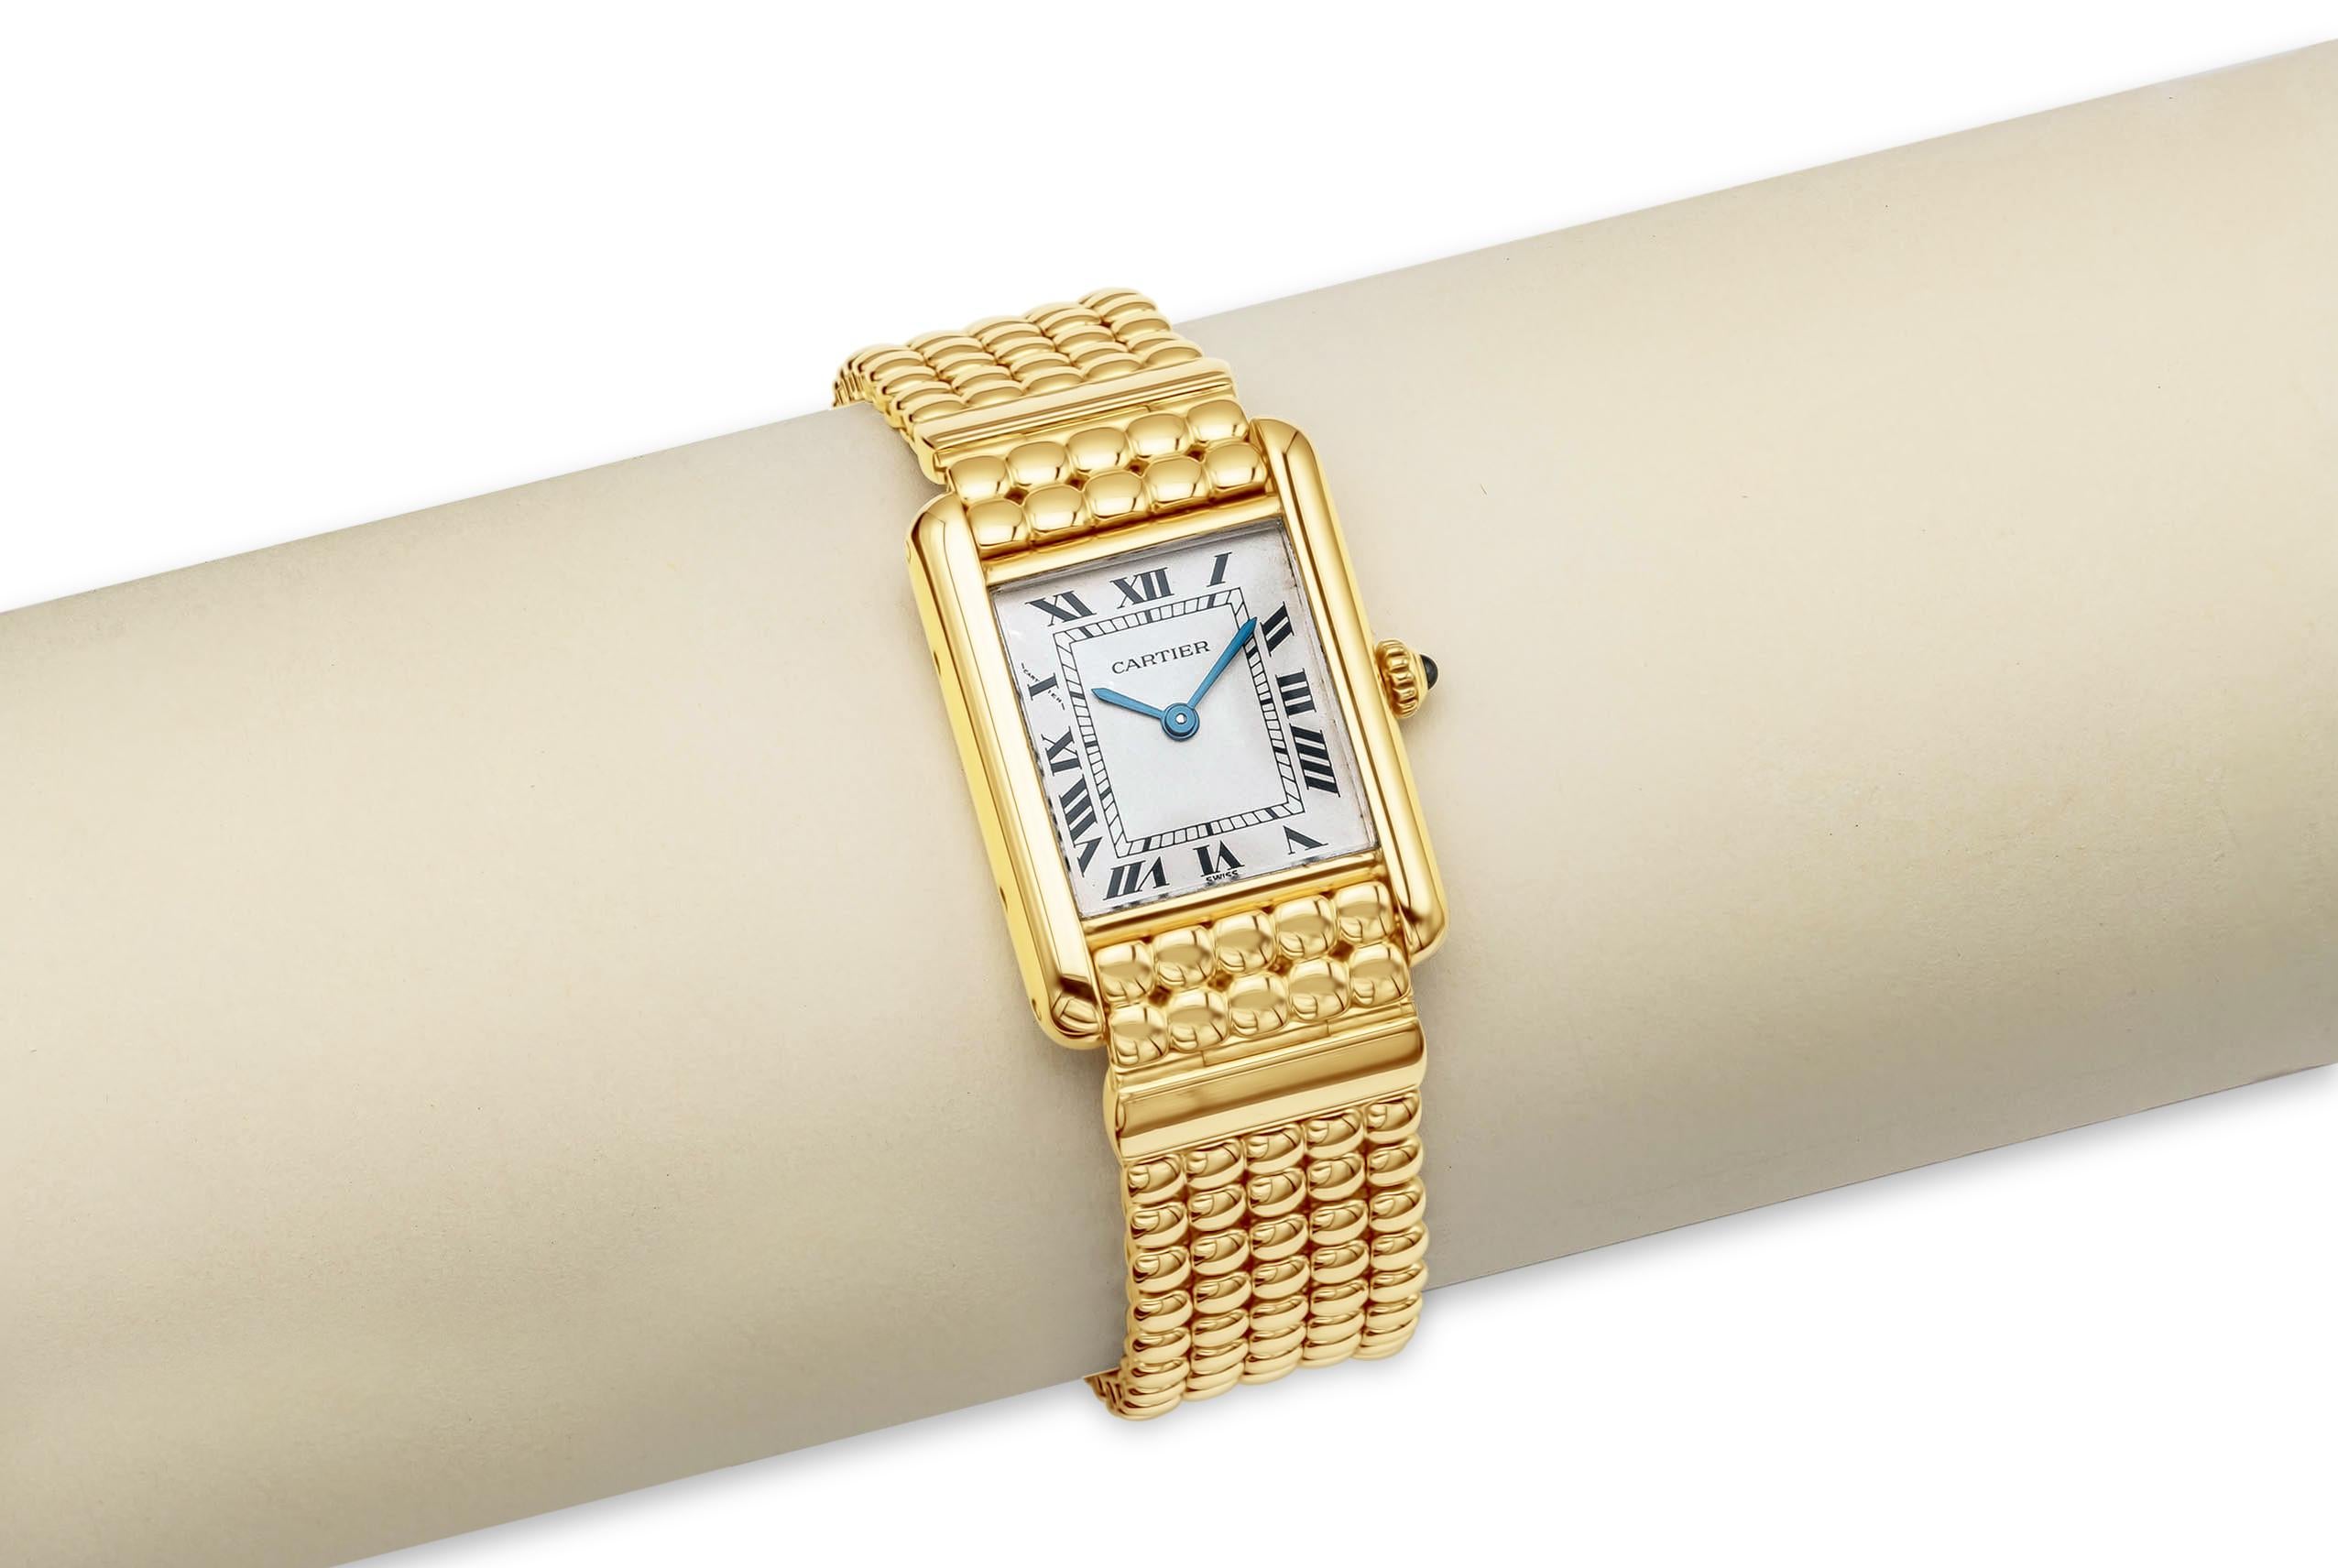 Case: Square case measuring 21mm x 28mm (lug to lug). Made in 18k yellow gold. Screw case back engraved 